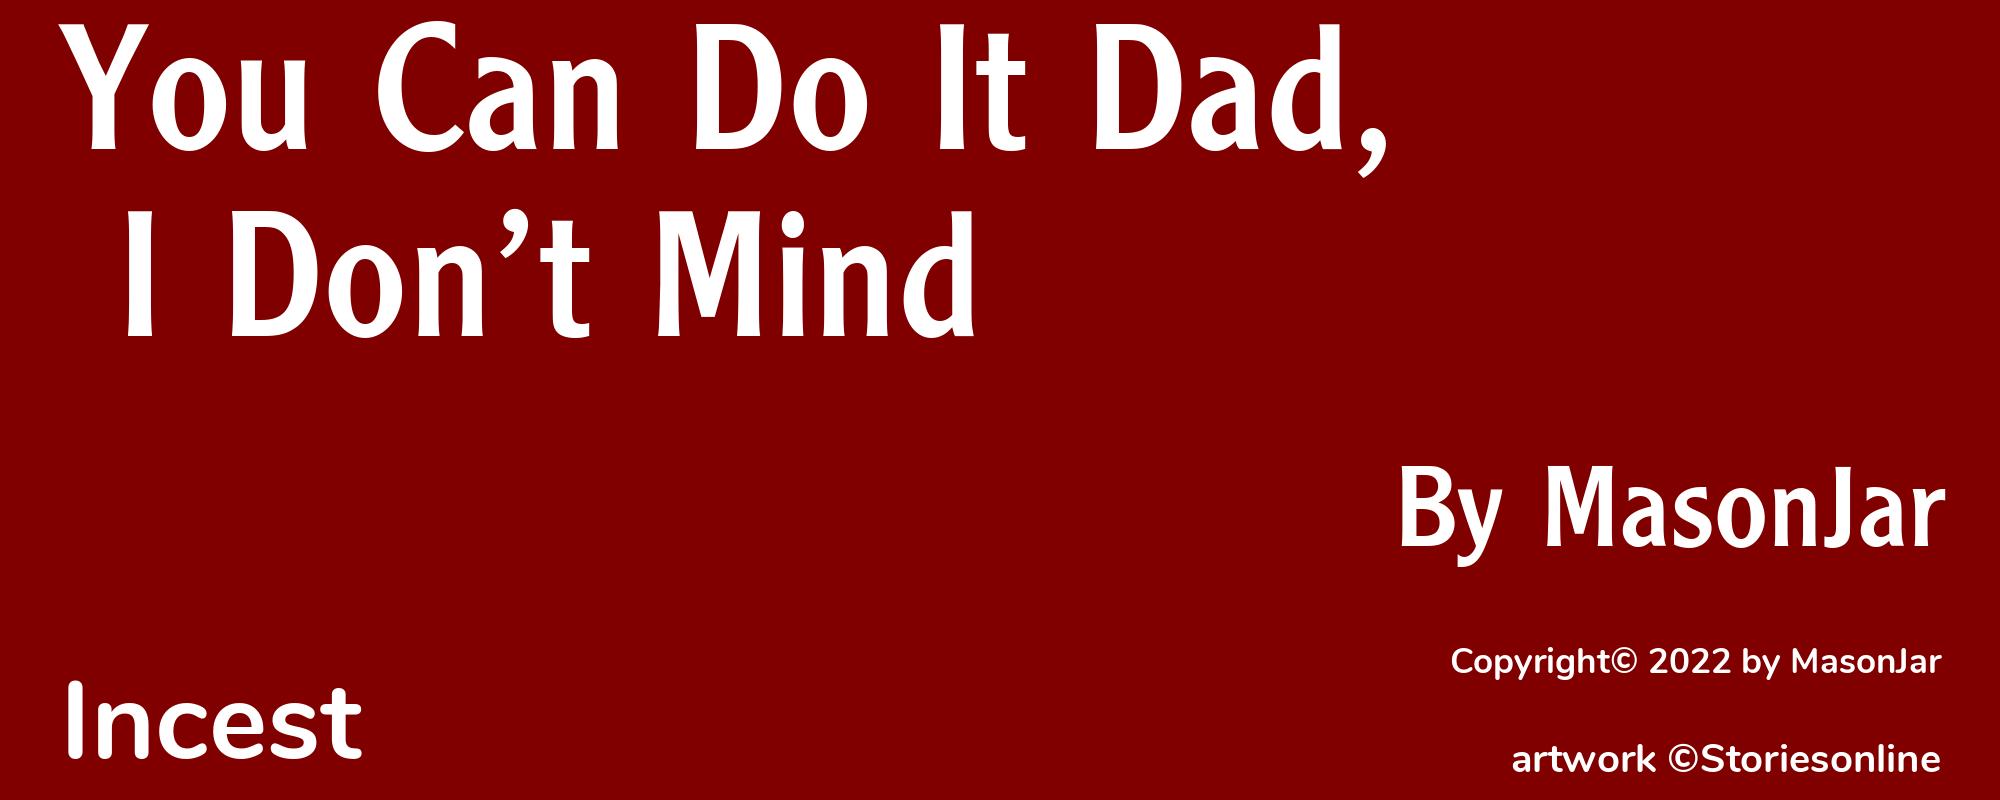 You Can Do It Dad, I Don’t Mind - Cover